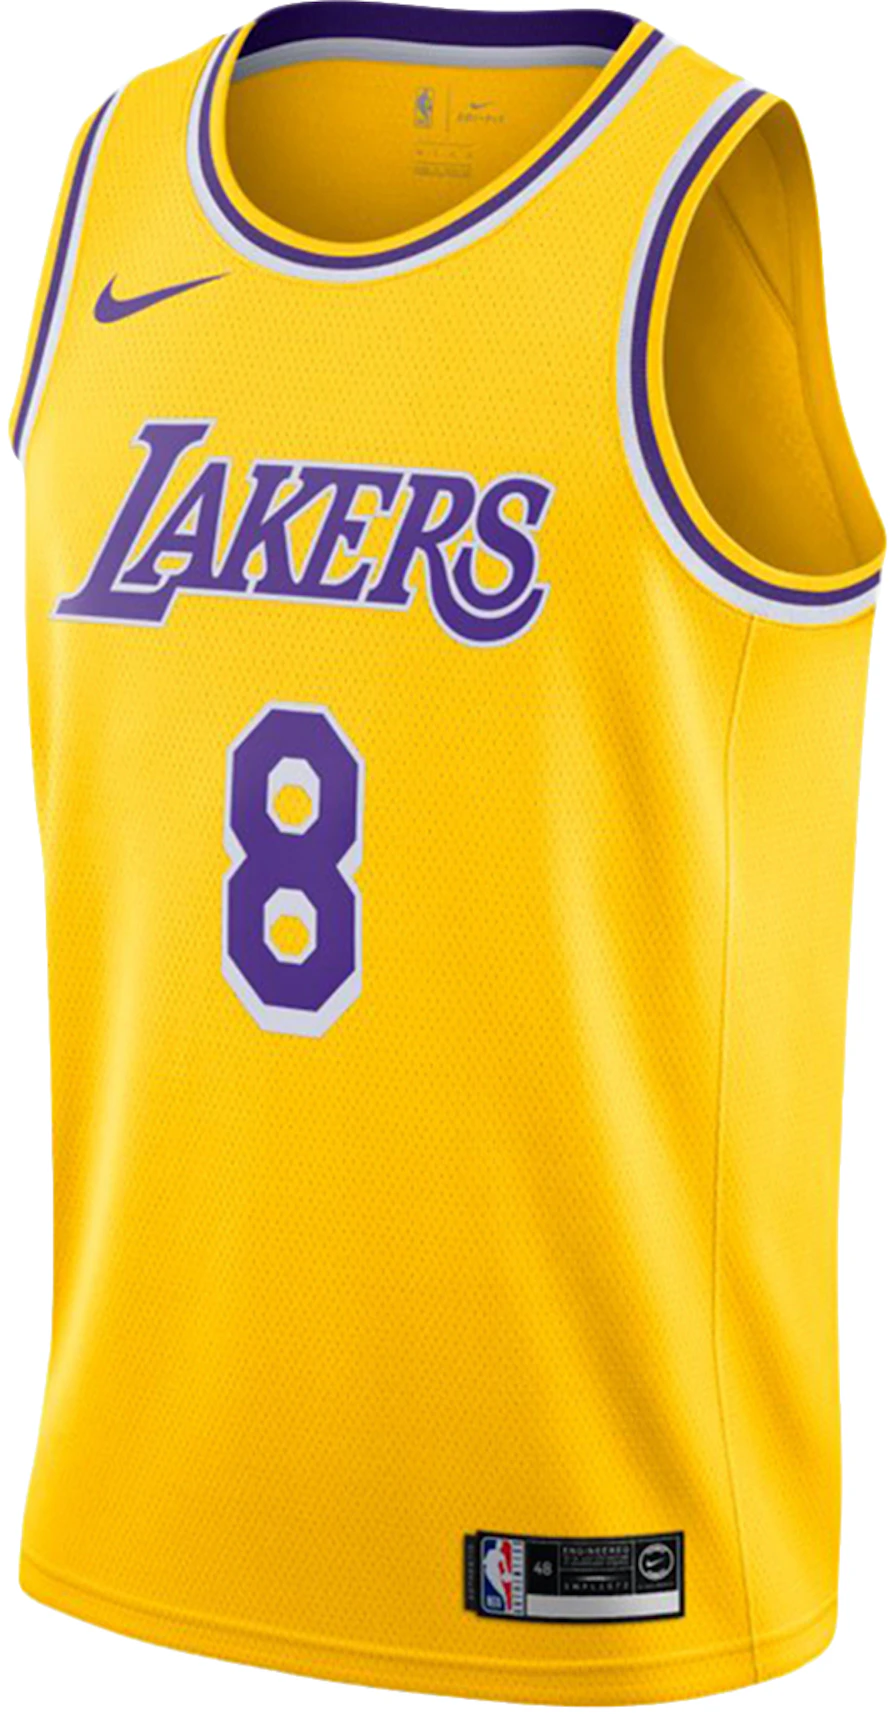 KOBE BRYANT LOS ANGELES LAKERS ALTERNATE 2003-04 AUTHENTIC JERSEY  AJY4CP19003-LALWHIT03KBR